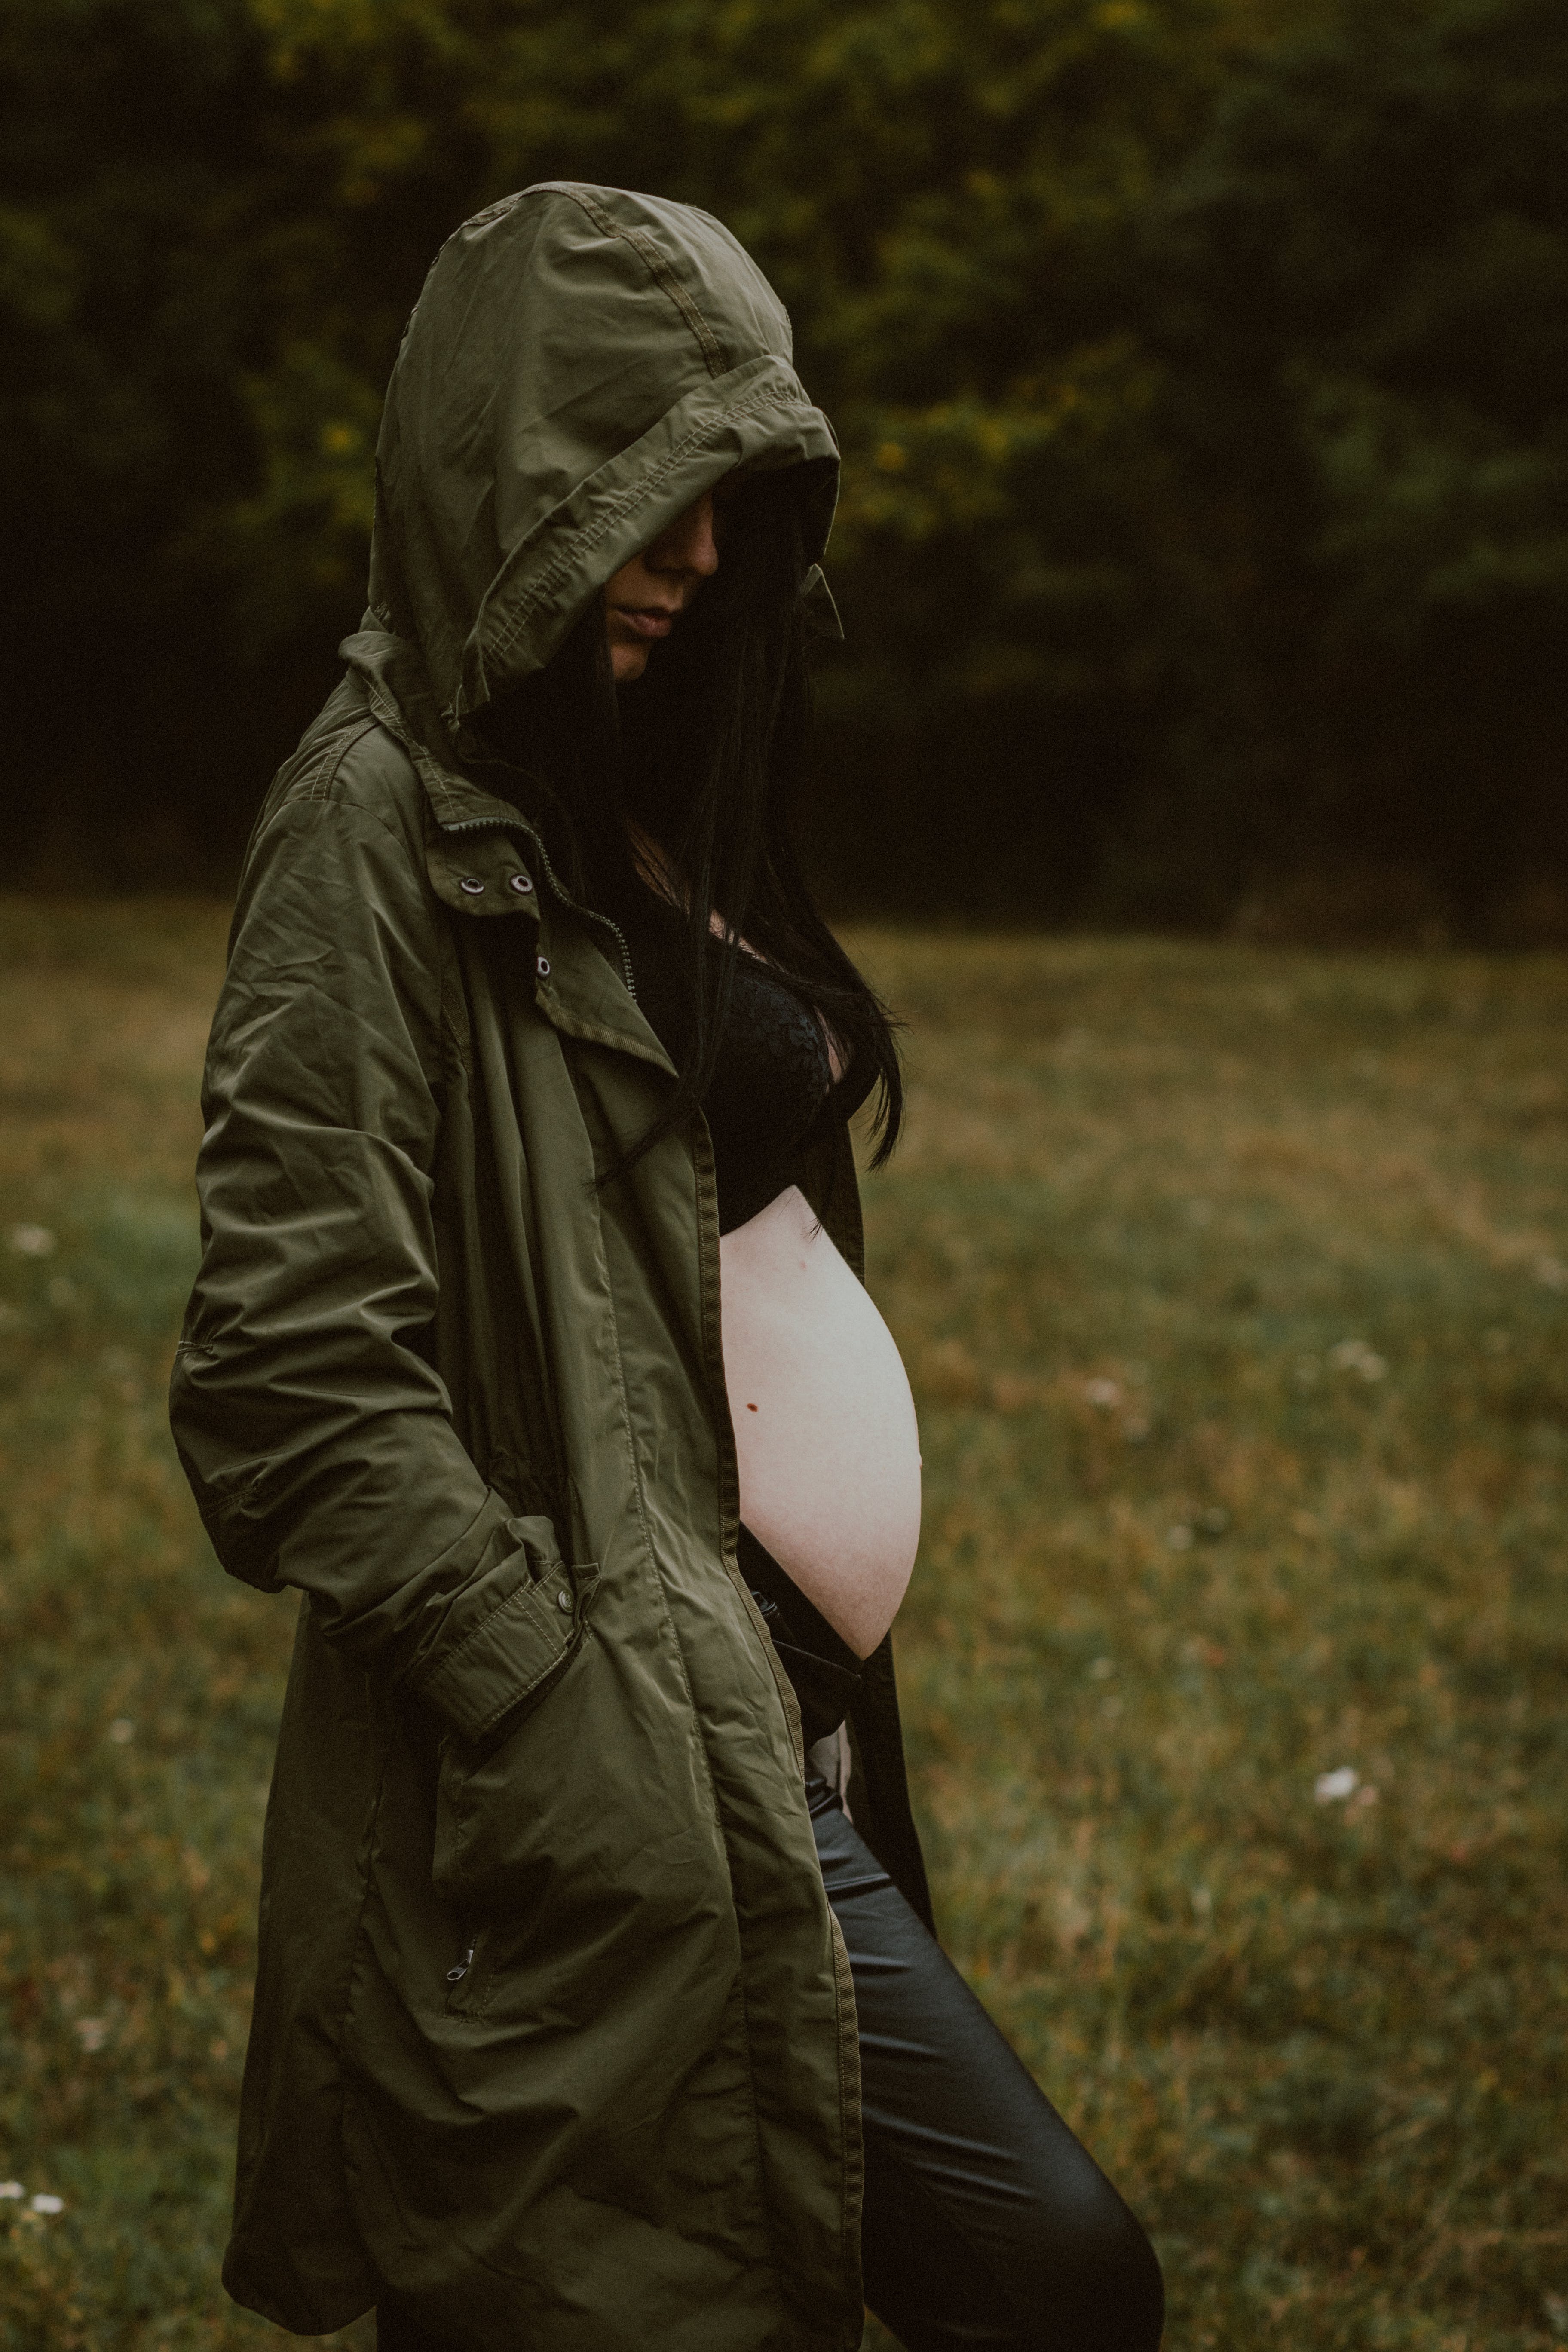 A pregnant woman wearing a green hooded coat. | Source: Pexels